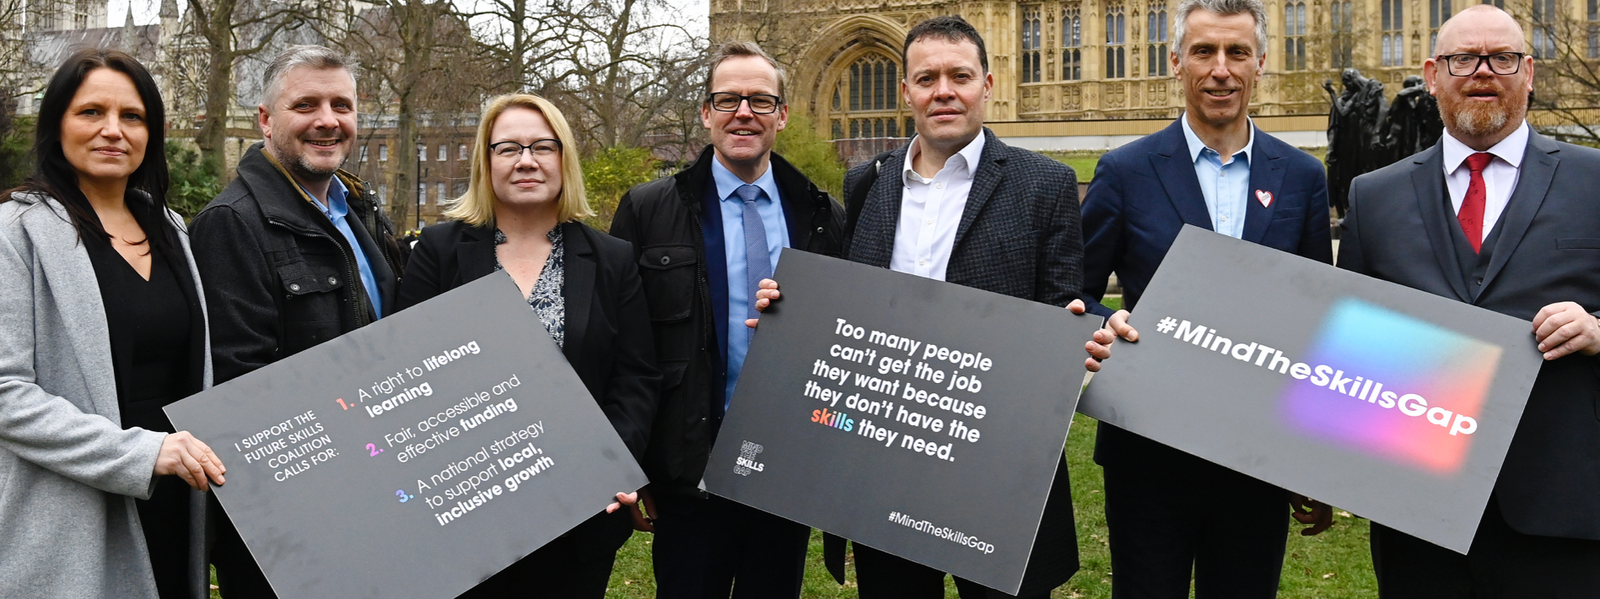 West Yorkshire college leaders take their case for extra skills investment to Westminster